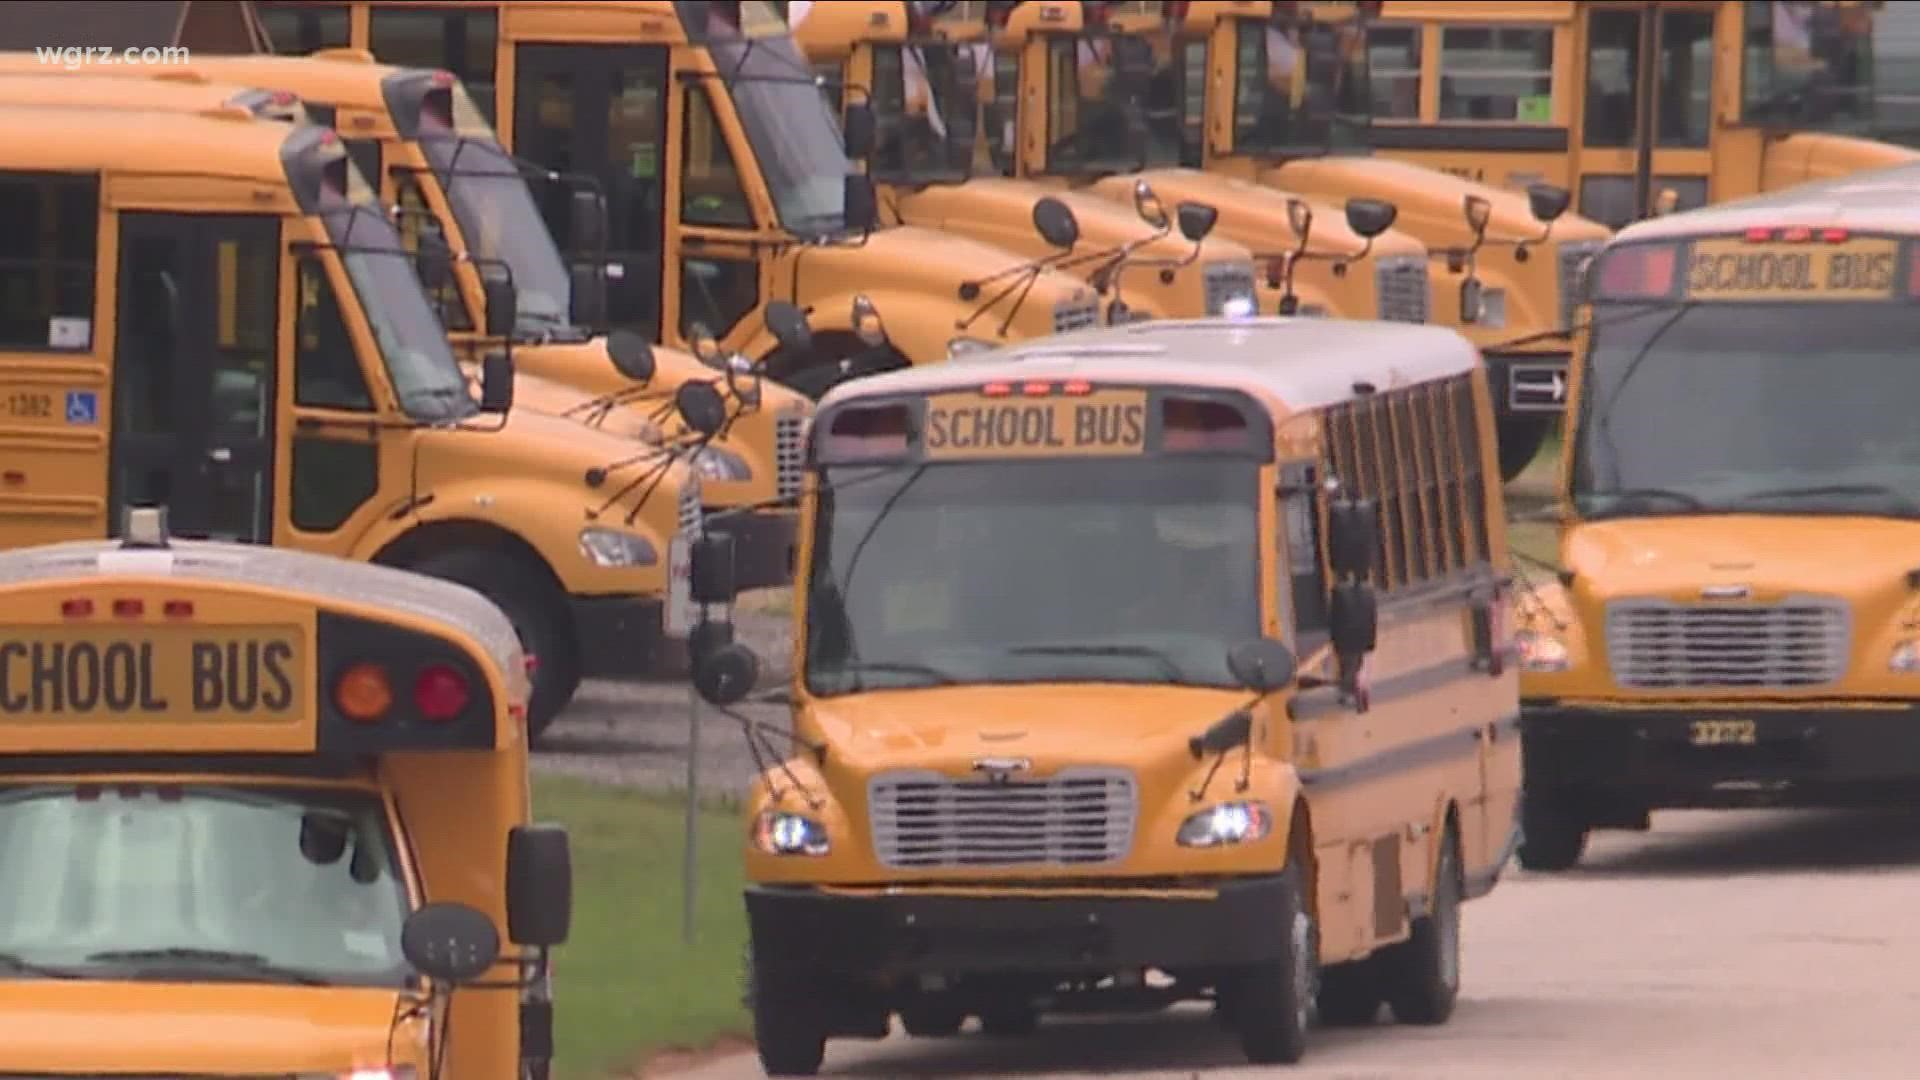 Buffalo of Education attempts to solve citywide bus shortage wgrz.com